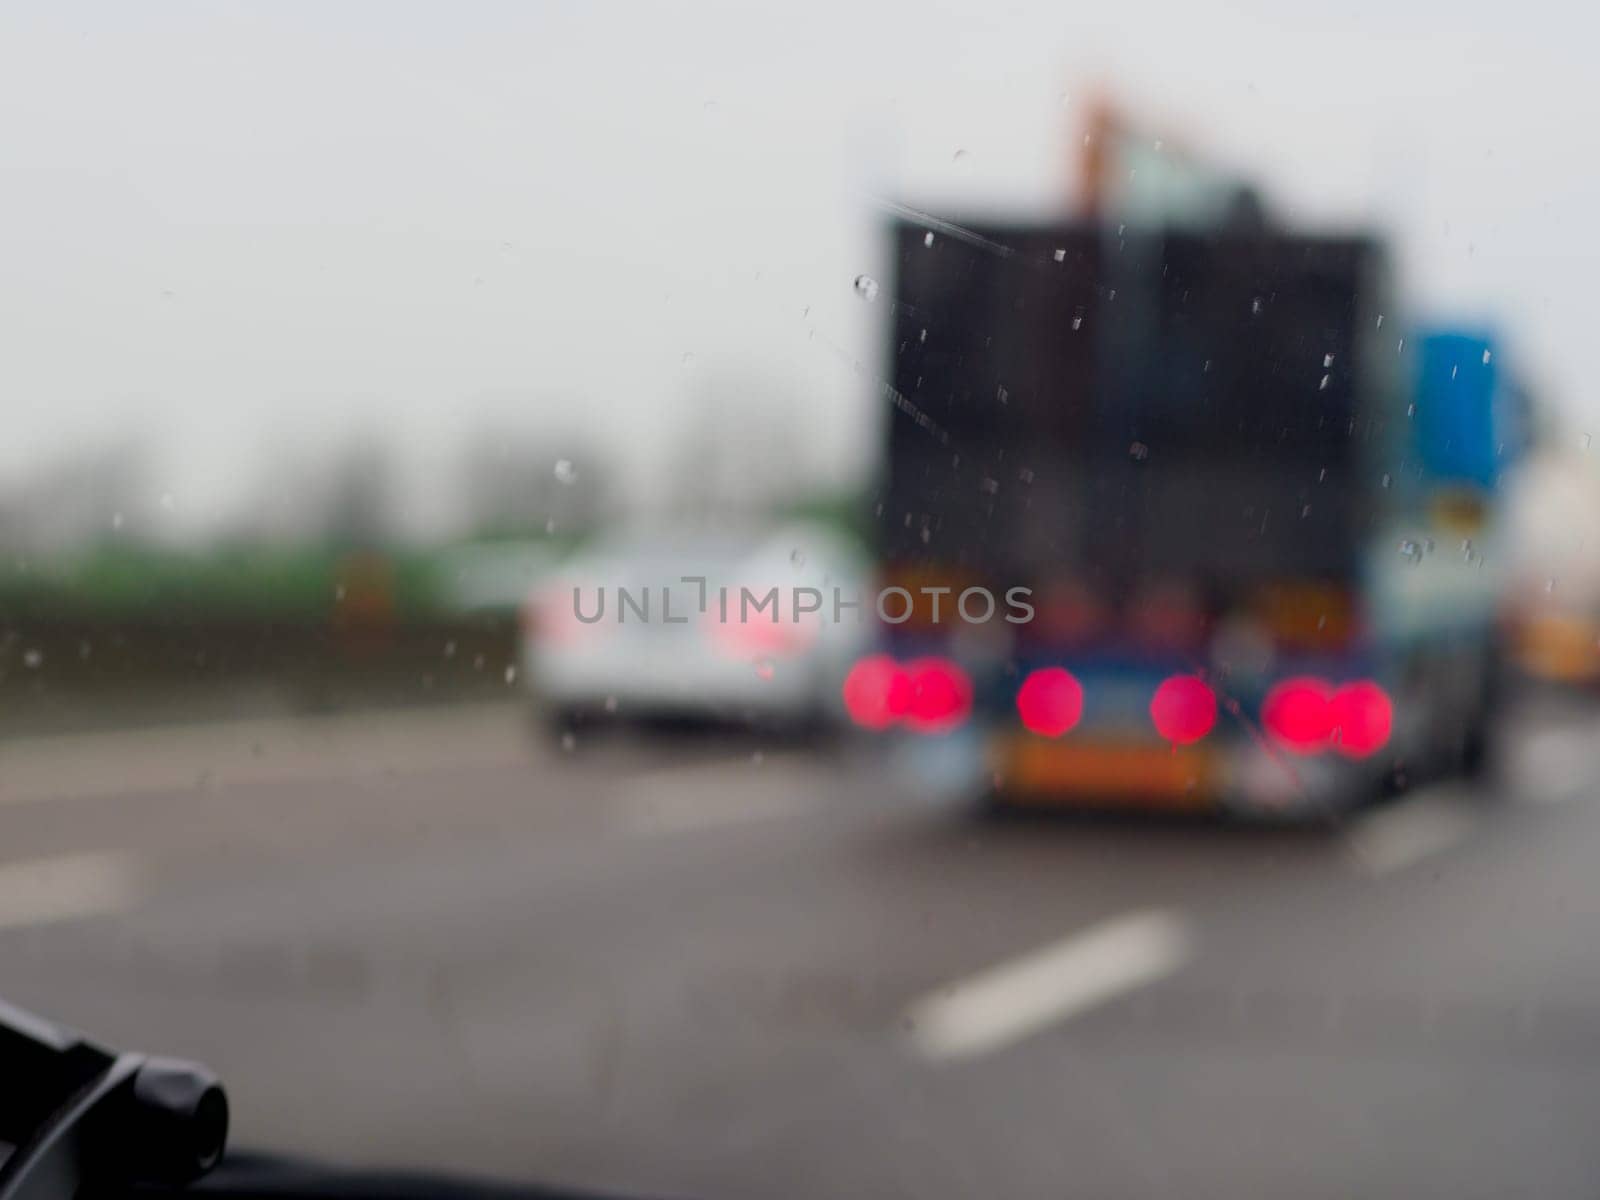 A blurry image of a busy expressway with cars and a truck under a storm rainy day by verbano